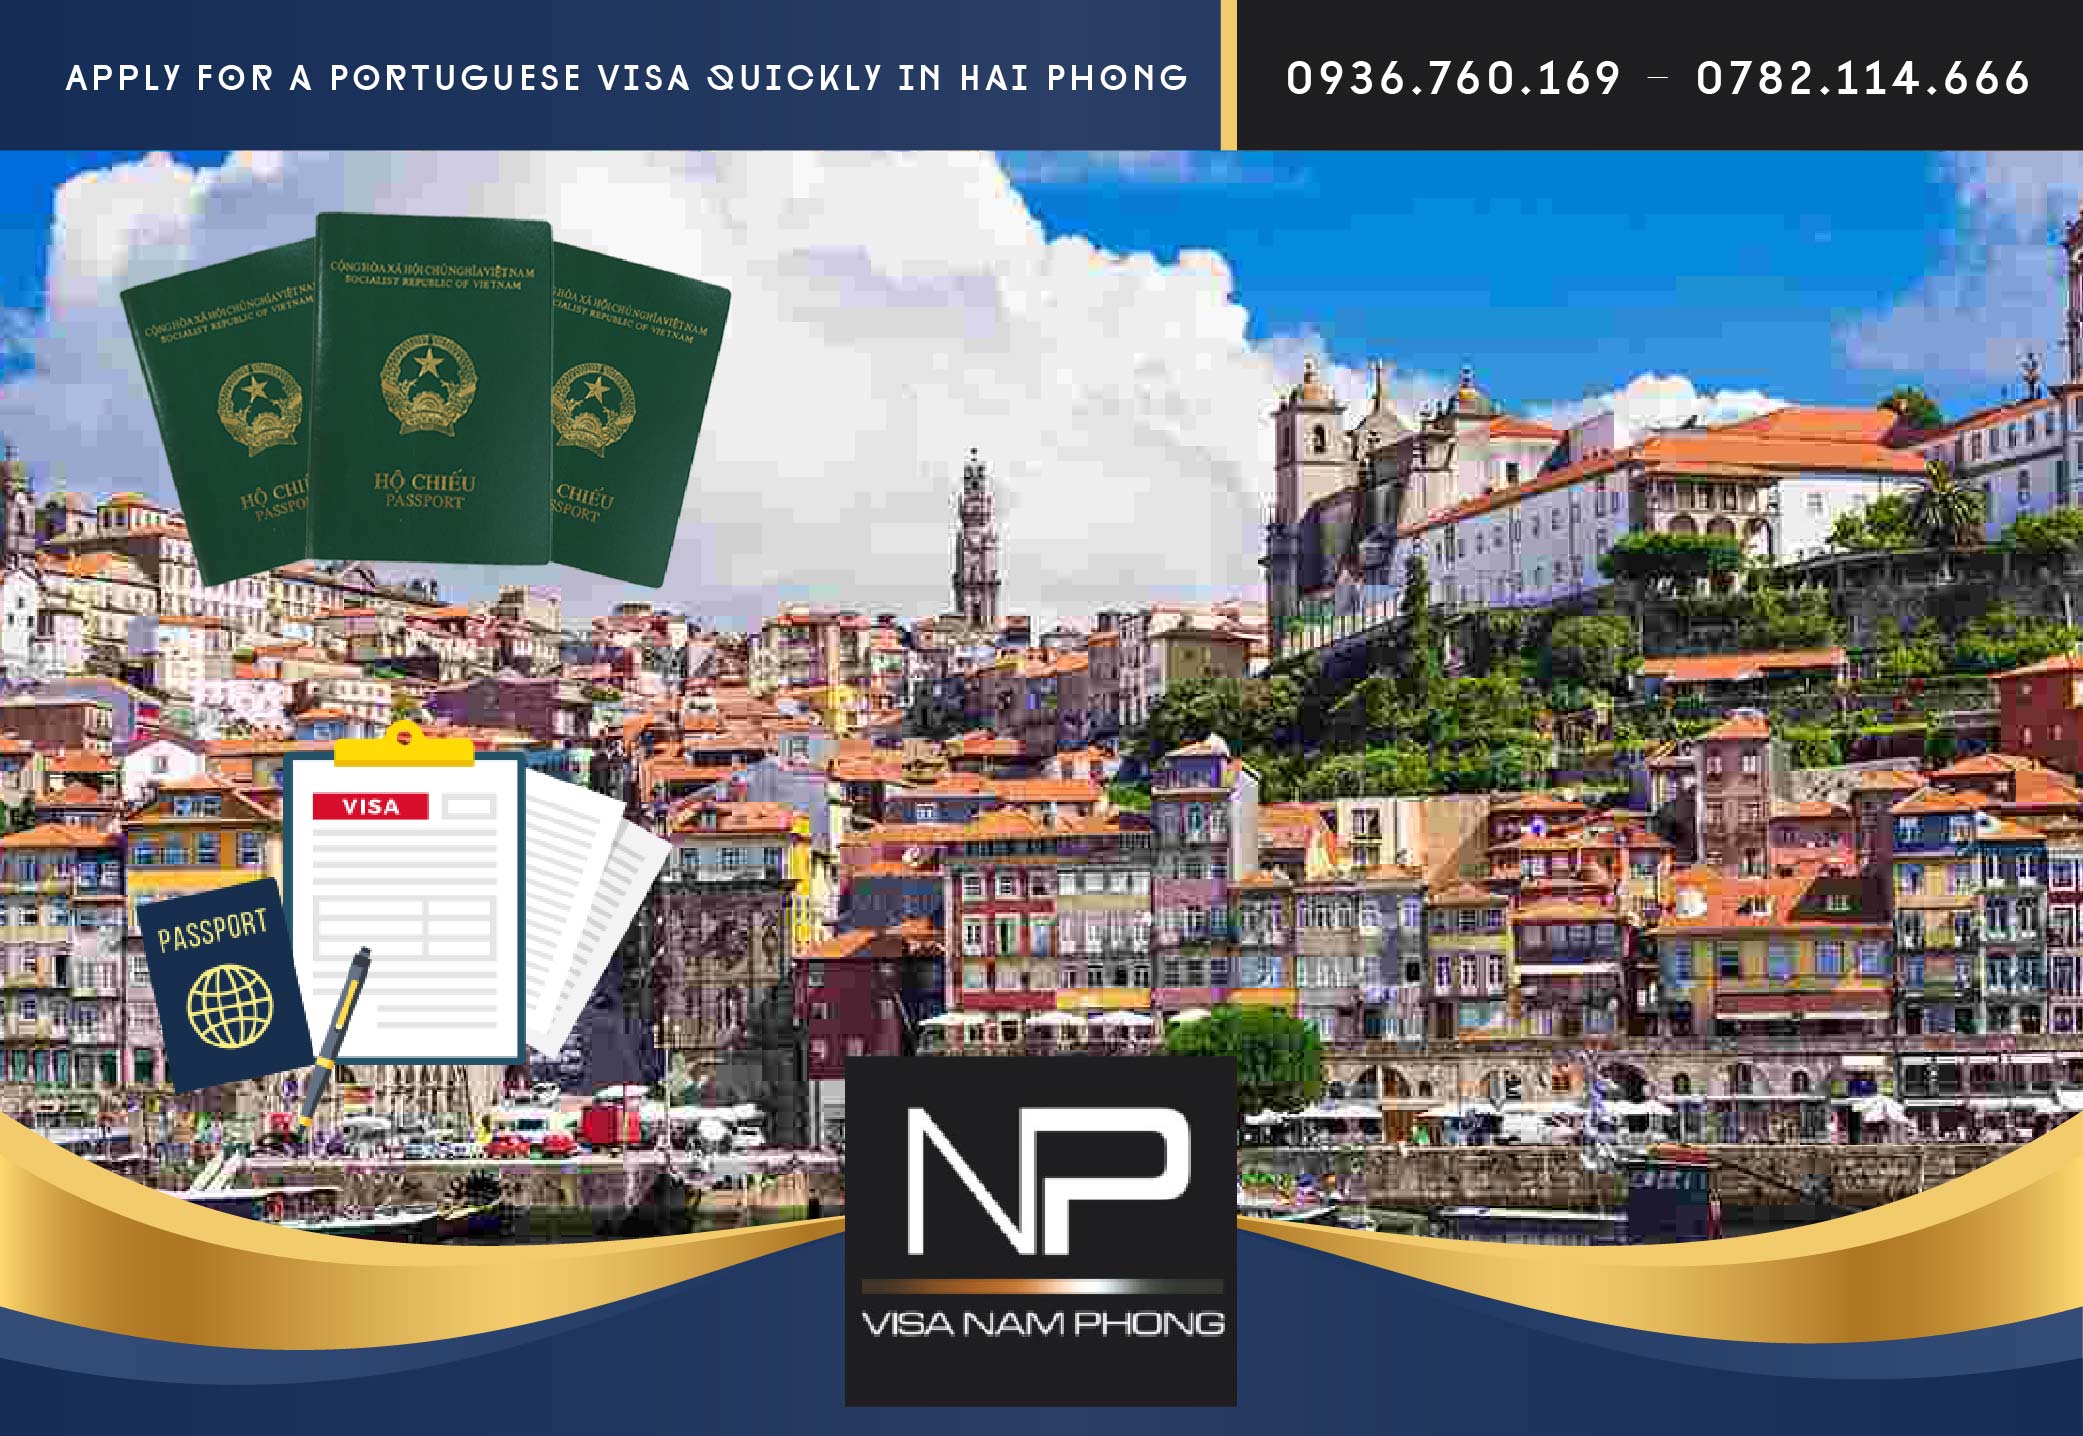 Apply for a Portuguese visa quickly in Hai Phong